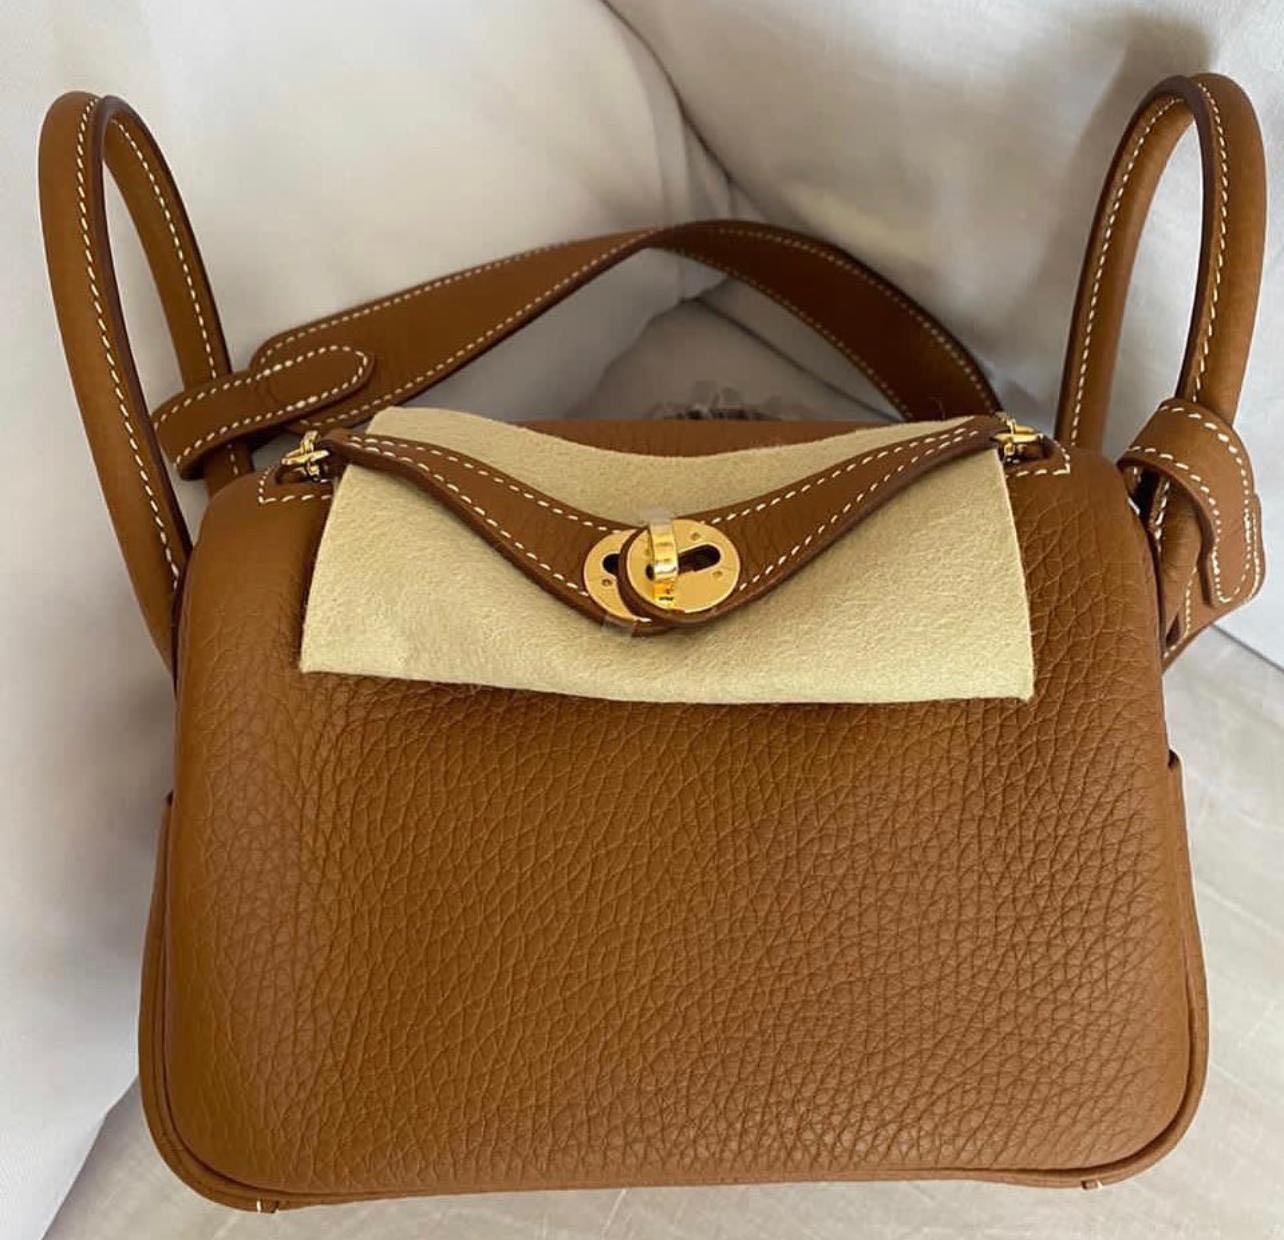 SOLD - Kept Unused - Hermès Mini Lindy Clemence Leather Etain GHW  Y_Hermès_BRANDS_MILAN CLASSIC Luxury Trade Company Since 2007